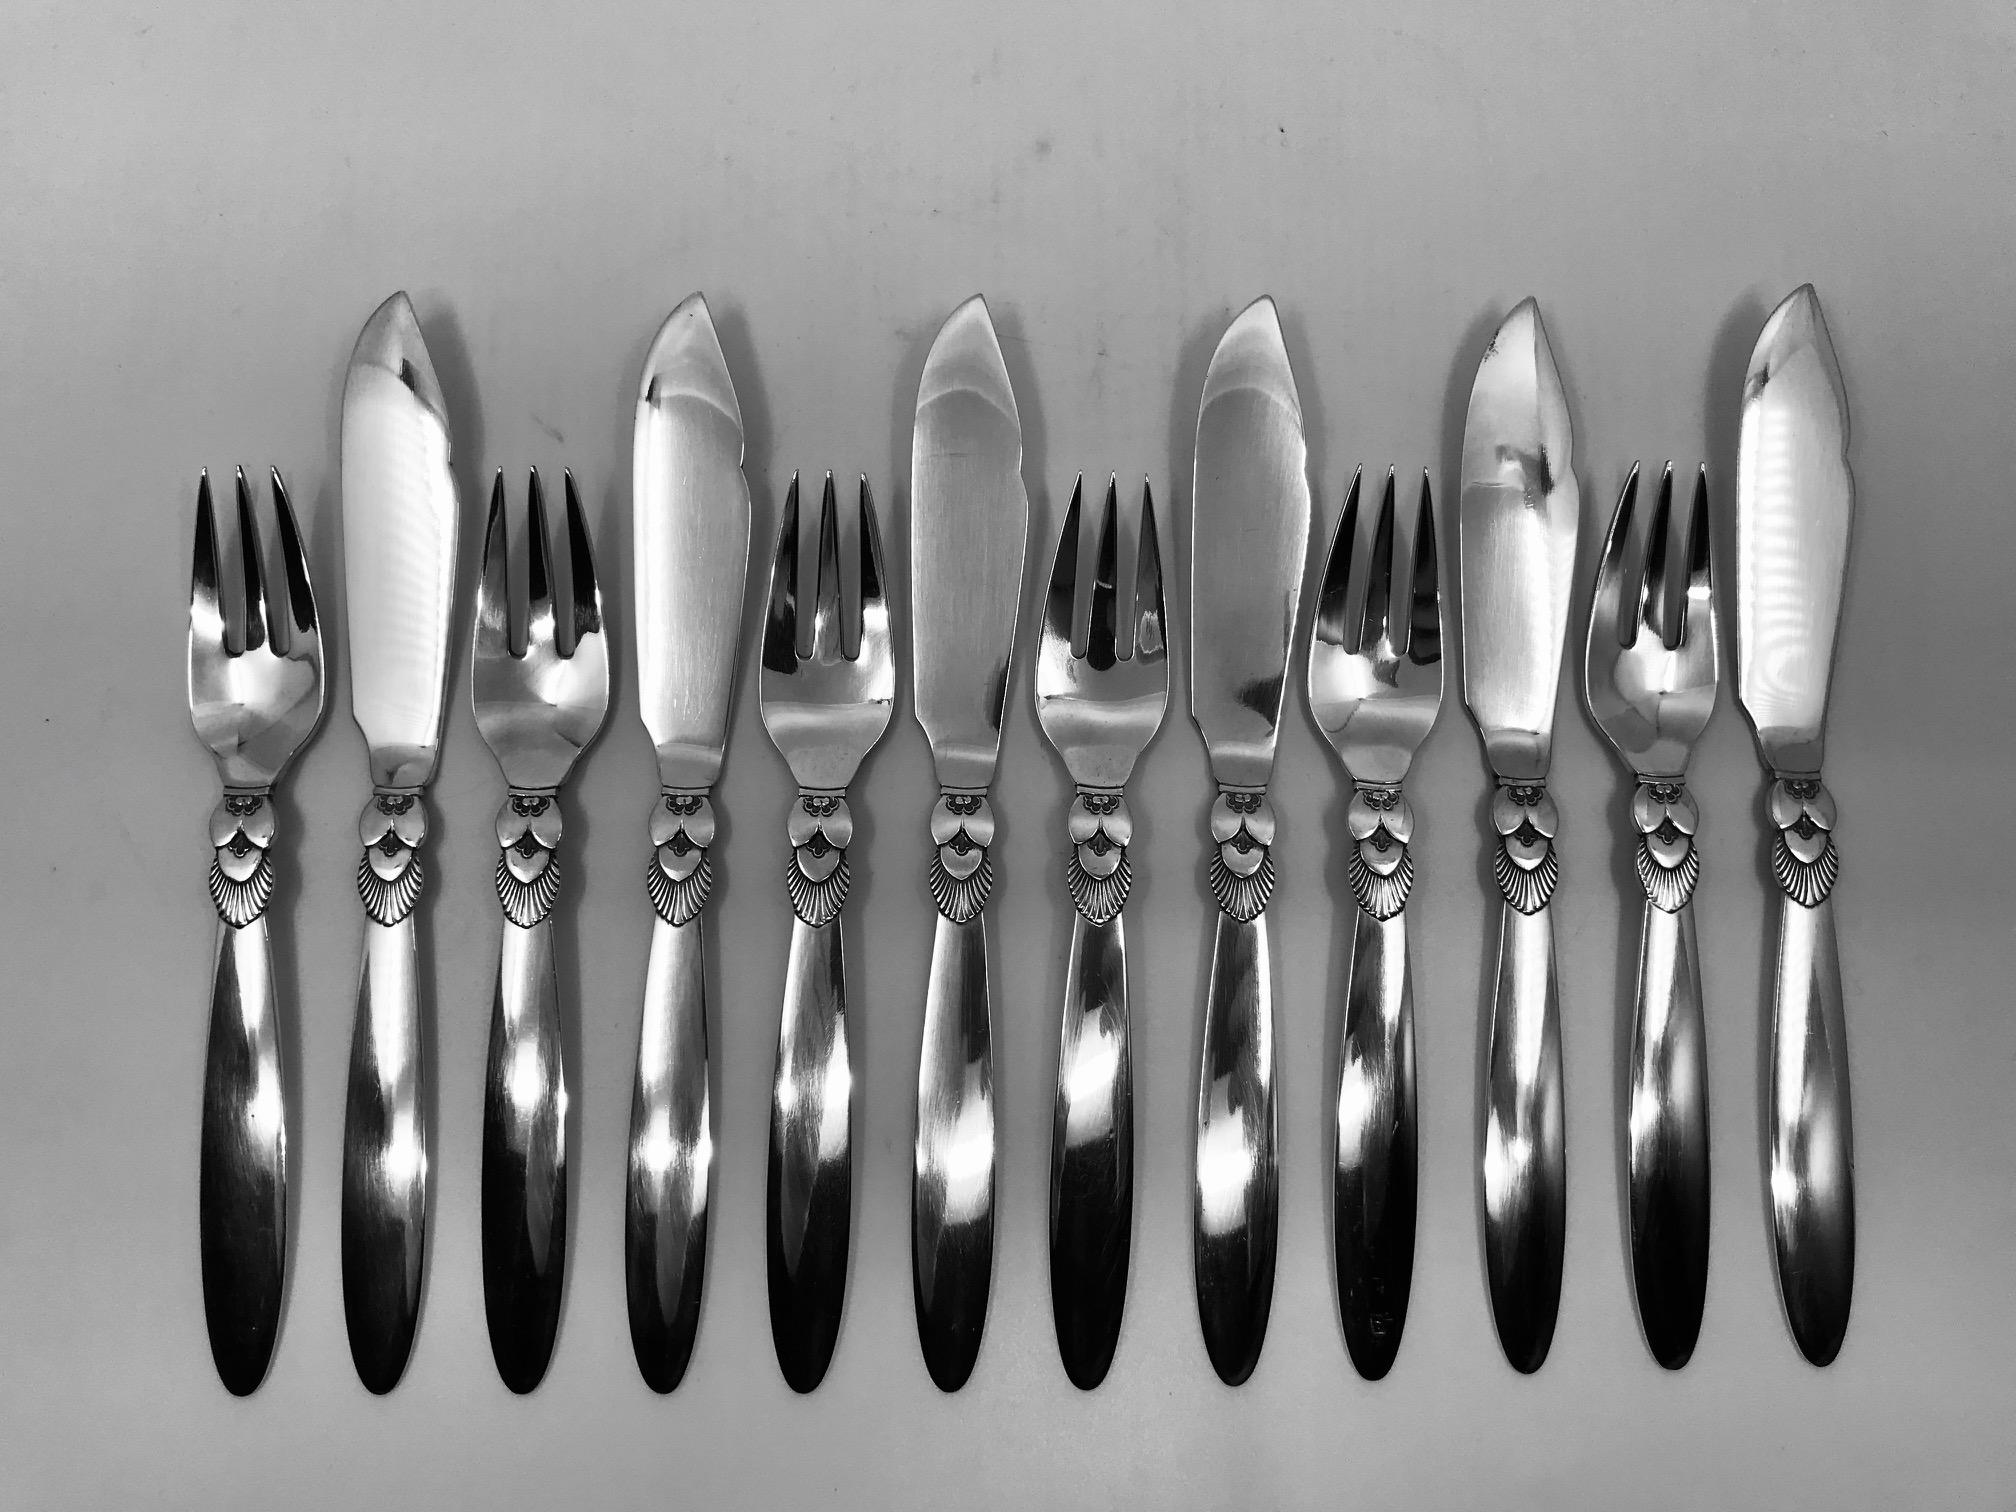 This is a set of 6 pairs of sterling silver Georg Jensen fish knives and forks in the Cactus pattern (12pcs total), design #30 by Gundorph Albertus from 1930.

The knives measure 7 5/8? (19.4cm) in length, the forks 6 3/8? (16.1cm).

All 12